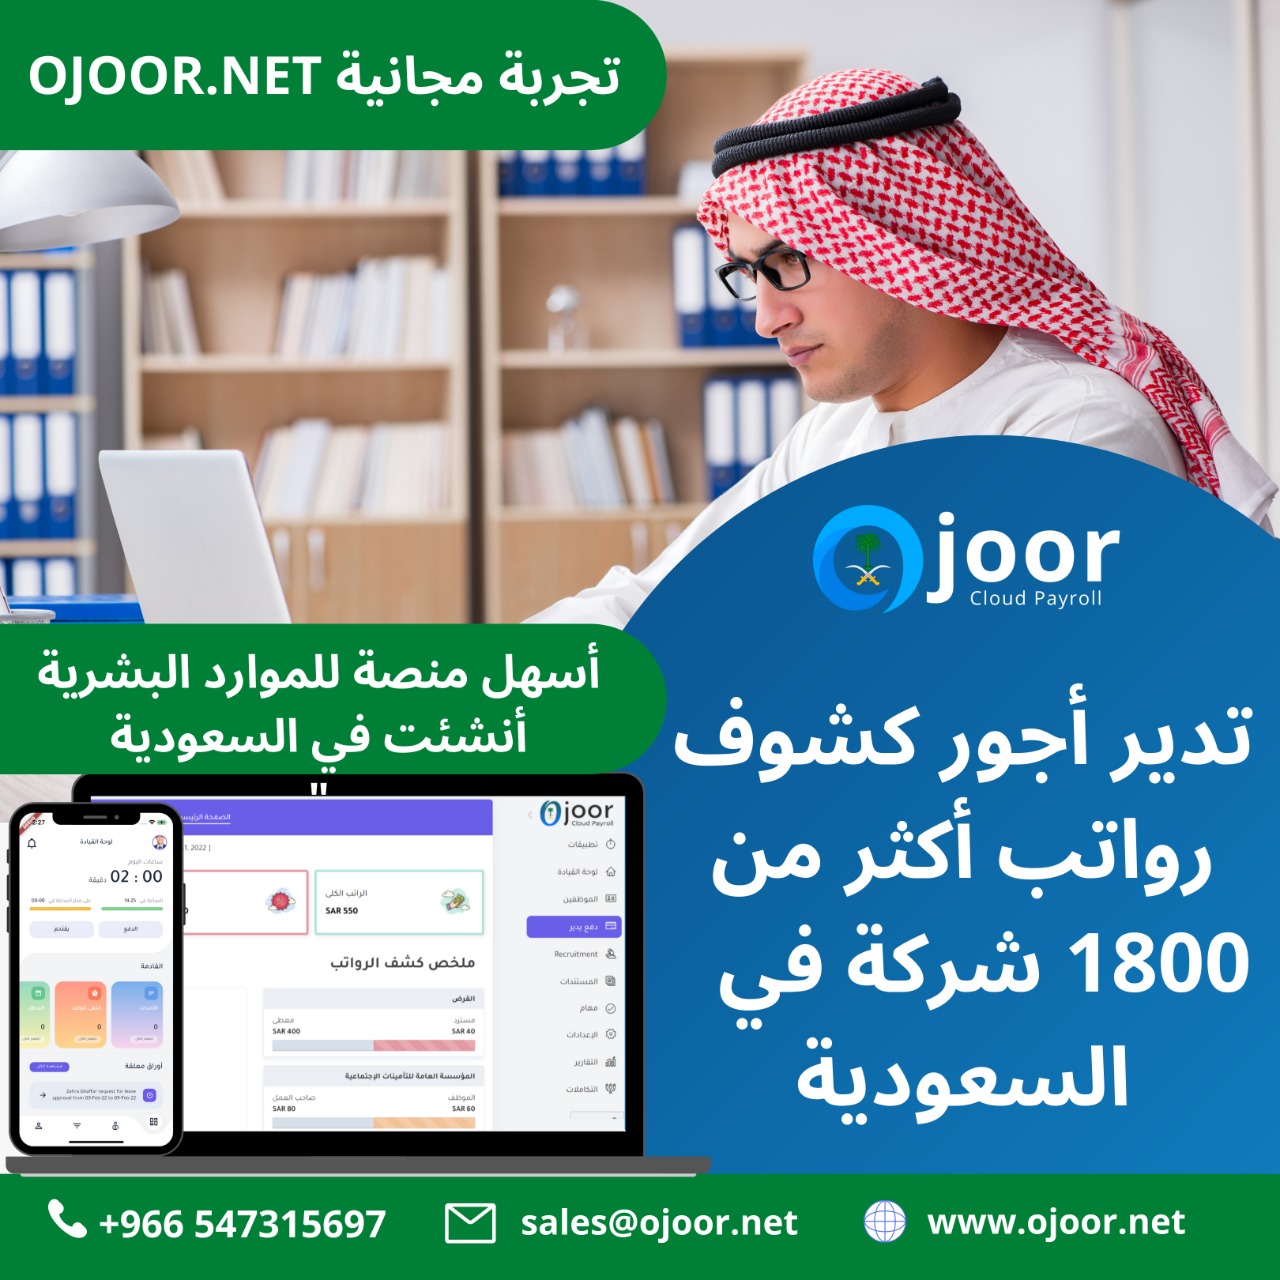 What are the features of the Payroll System in Saudi?